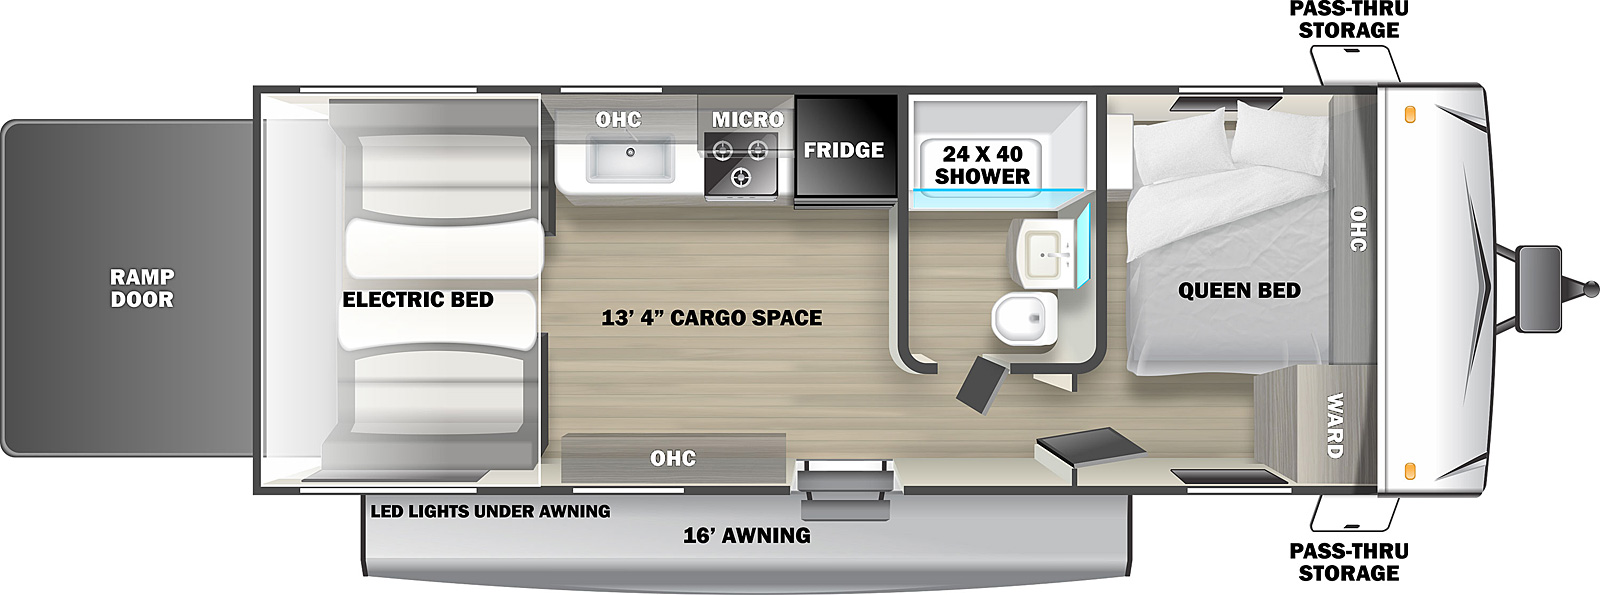 The Sandstorm 211SLC Toy Hauler has one entry door, a rear ramp door, and an electric awning. Pass through storage is near the front of the RV. The RV has 13 foot 4 inch cargo space. The entry door leads to a living area on the left and a hallway on the right. To the left of the overhead storage are two chairs with a table between them. A ramp door makes up the rear wall of the RV. Opposite the chairs is a flip sofa with a table. A kitchen area is to the right of the sofa. The kitchen has a countertop with a sink and a stove. Overhead storage is above the sink and a microwave is above the stove. A refrigerator is to the right of the stove. A hallway is to the right of the entry door. The hallway has a door on the left leading to the bathroom. The bathroom has a tub shower, a sink, and a toilet. Straight ahead in the hallway is a door leading to the bedroom. The night stand is in the rear off door corner of the bedroom. A queen bed is in the front off door corner. Overhead storage is above the bed. A wardrobe is in the front door side corner of the living room.